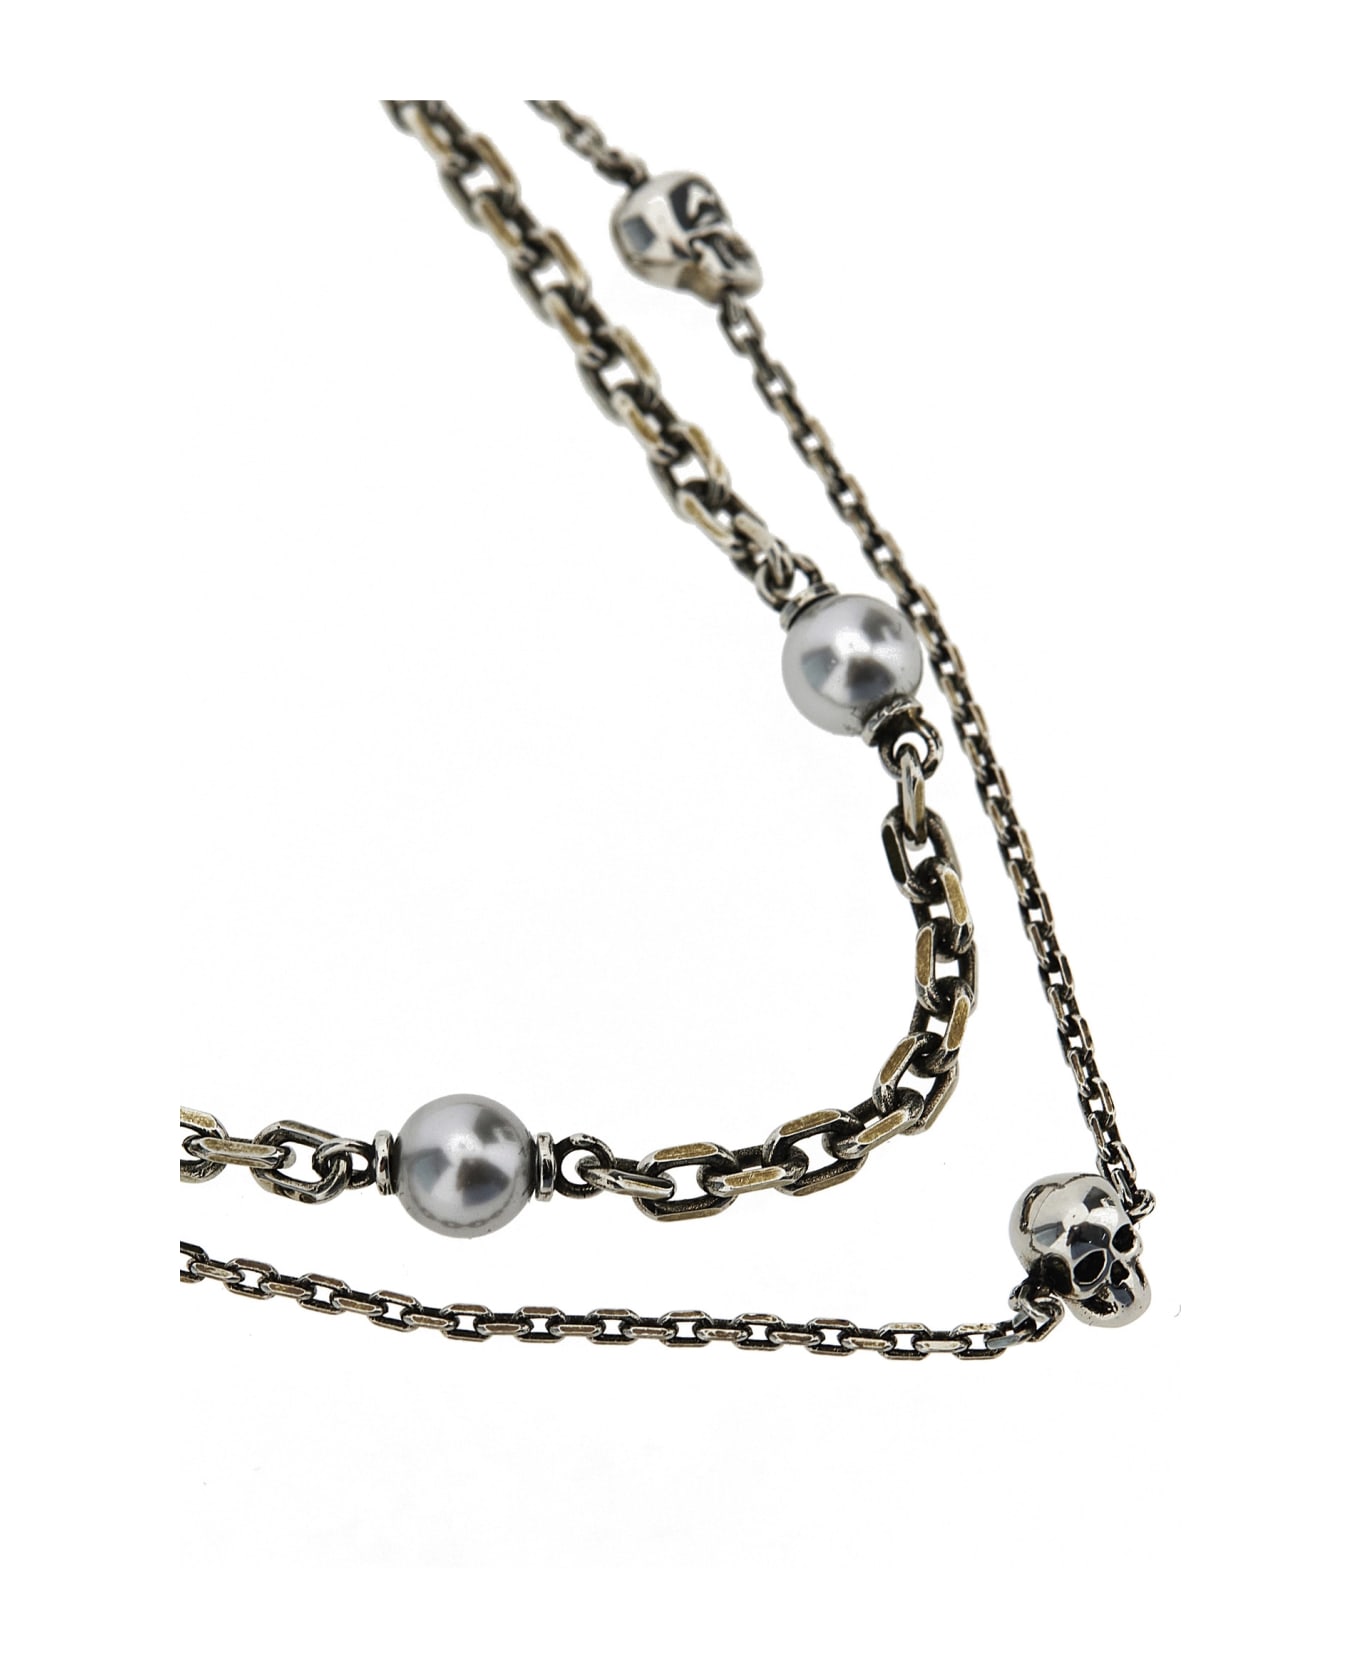 Alexander McQueen Pearly Skull Necklace - Silver